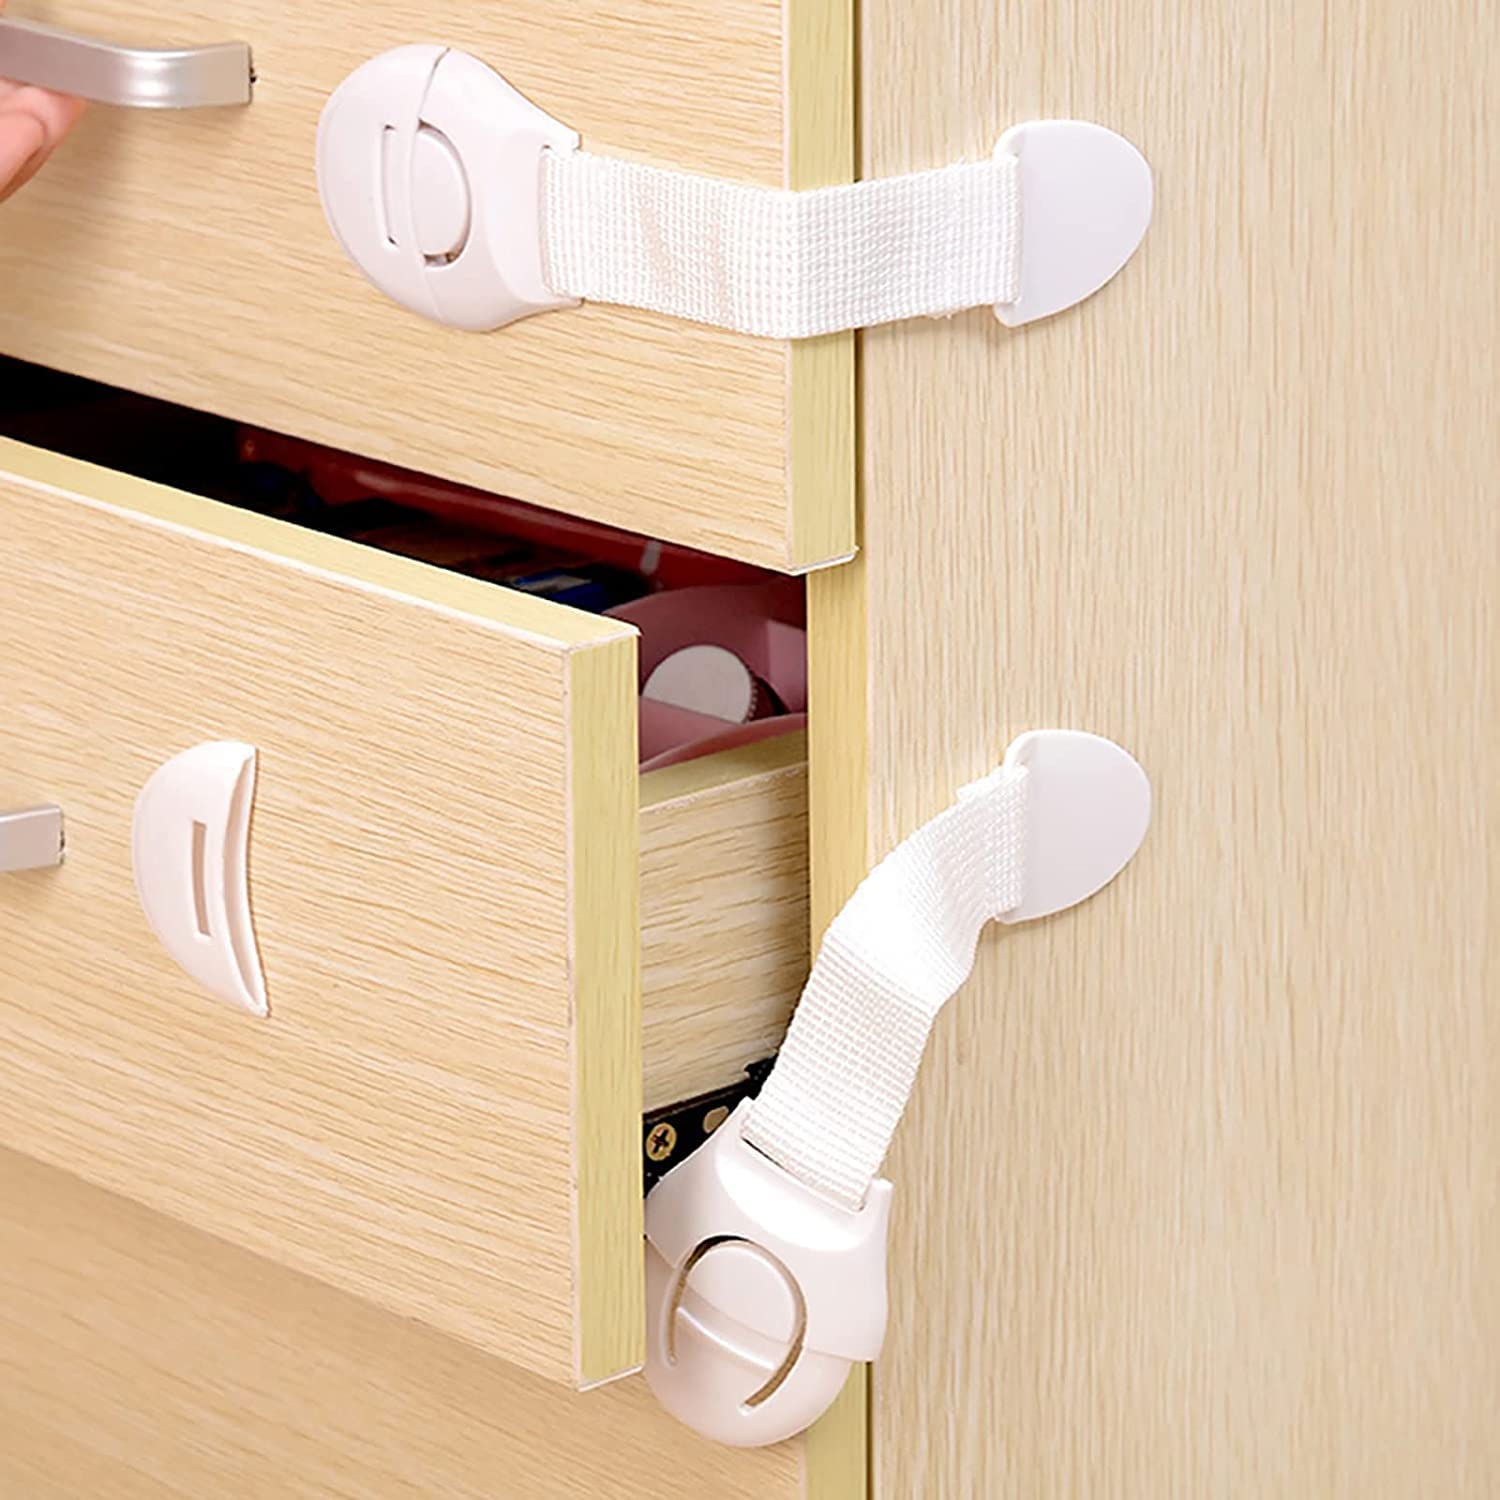 4 Pack Baby Locks Child Safety Strap Locks, Safe Quick and Easy Adhesive  Cabinet Drawer Door Latches for Fridge, Cabinets, Drawers, Dishwasher